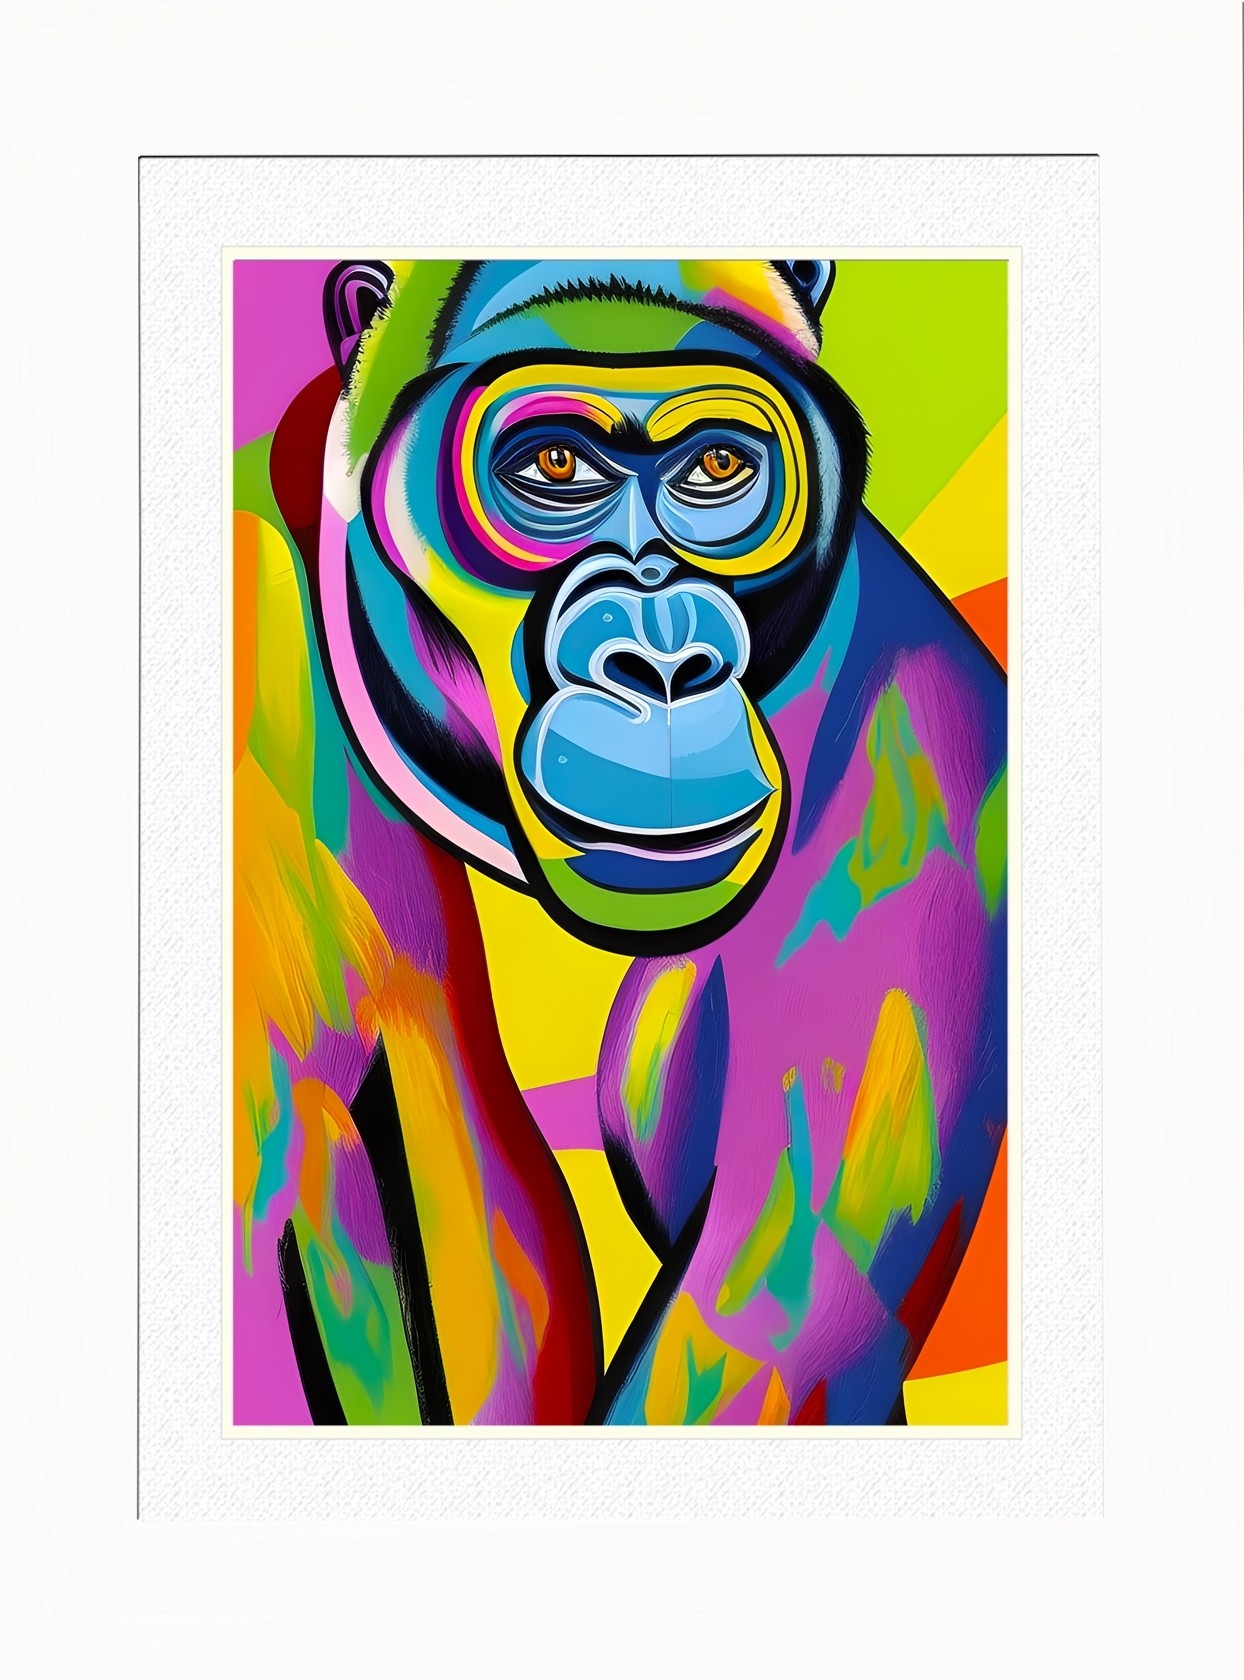 Monkey Chimpanzee Animal Picture Framed Colourful Abstract Art (25cm x 20cm White Frame)